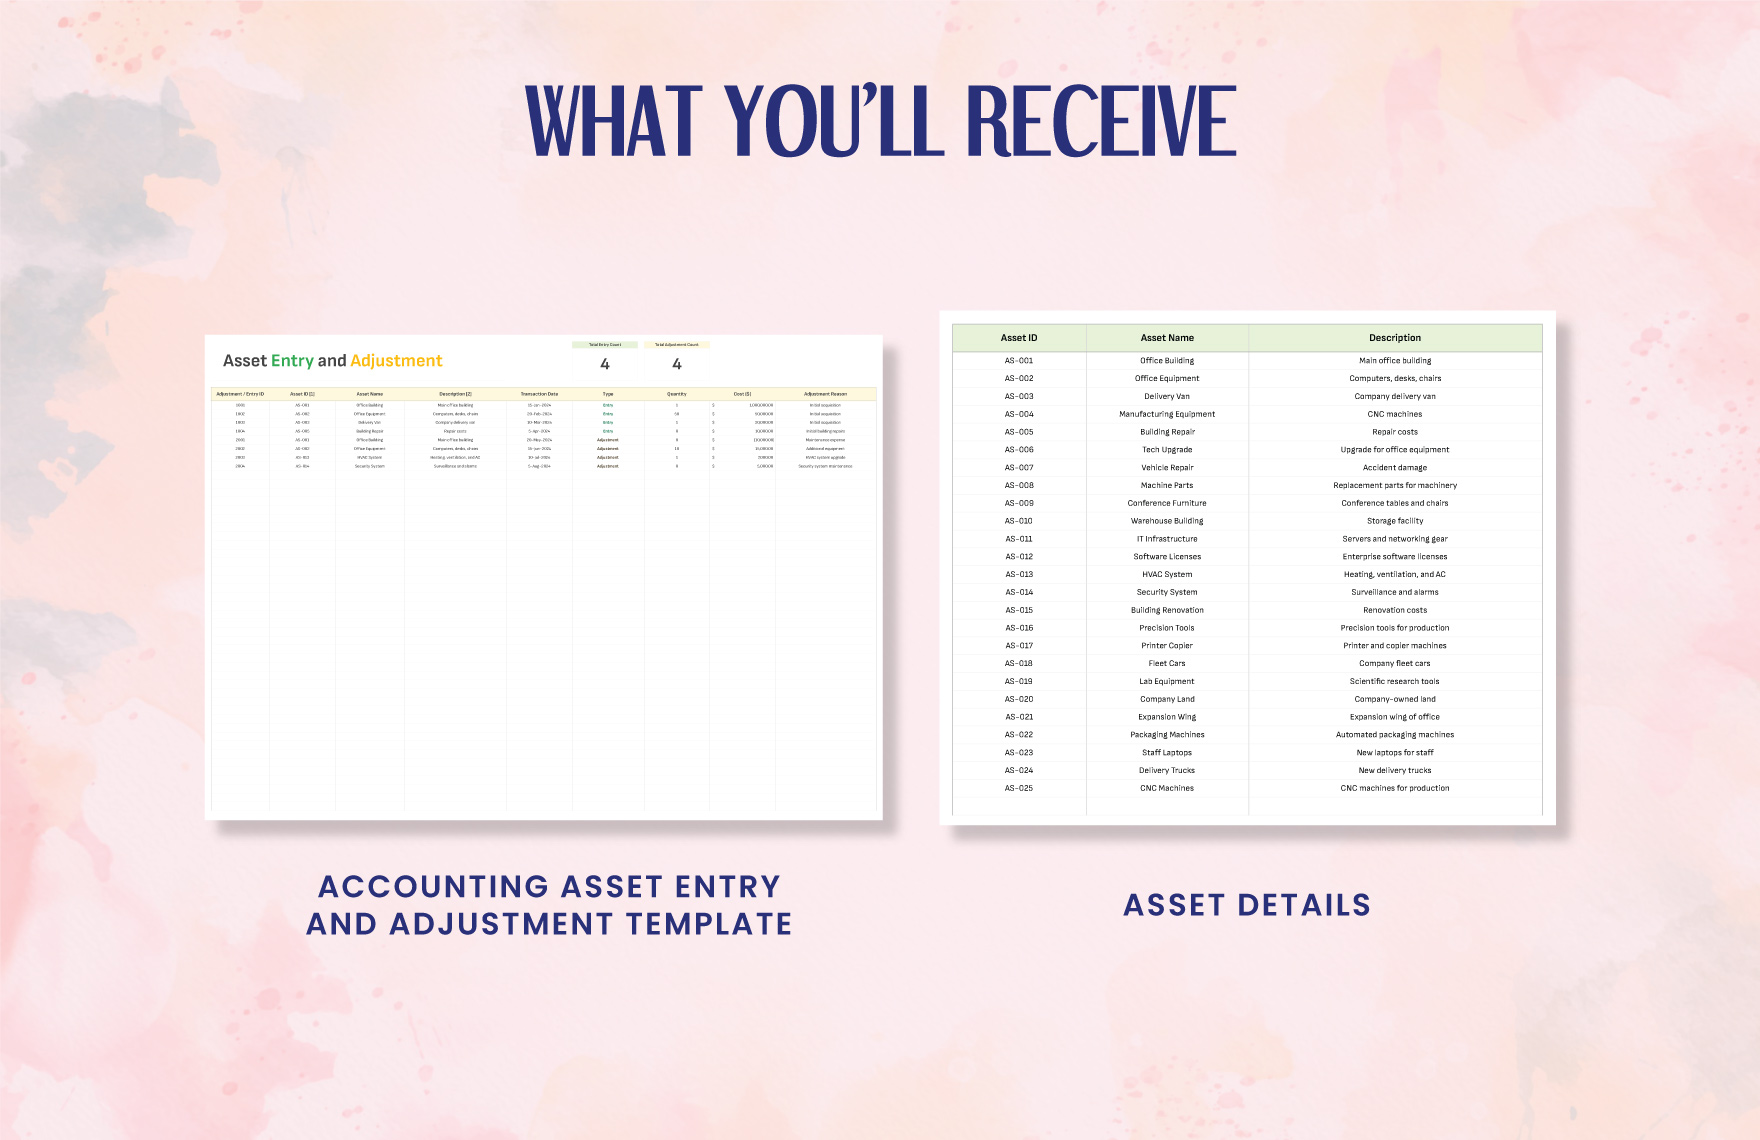 Accounting Asset Entry and Adjustment Template